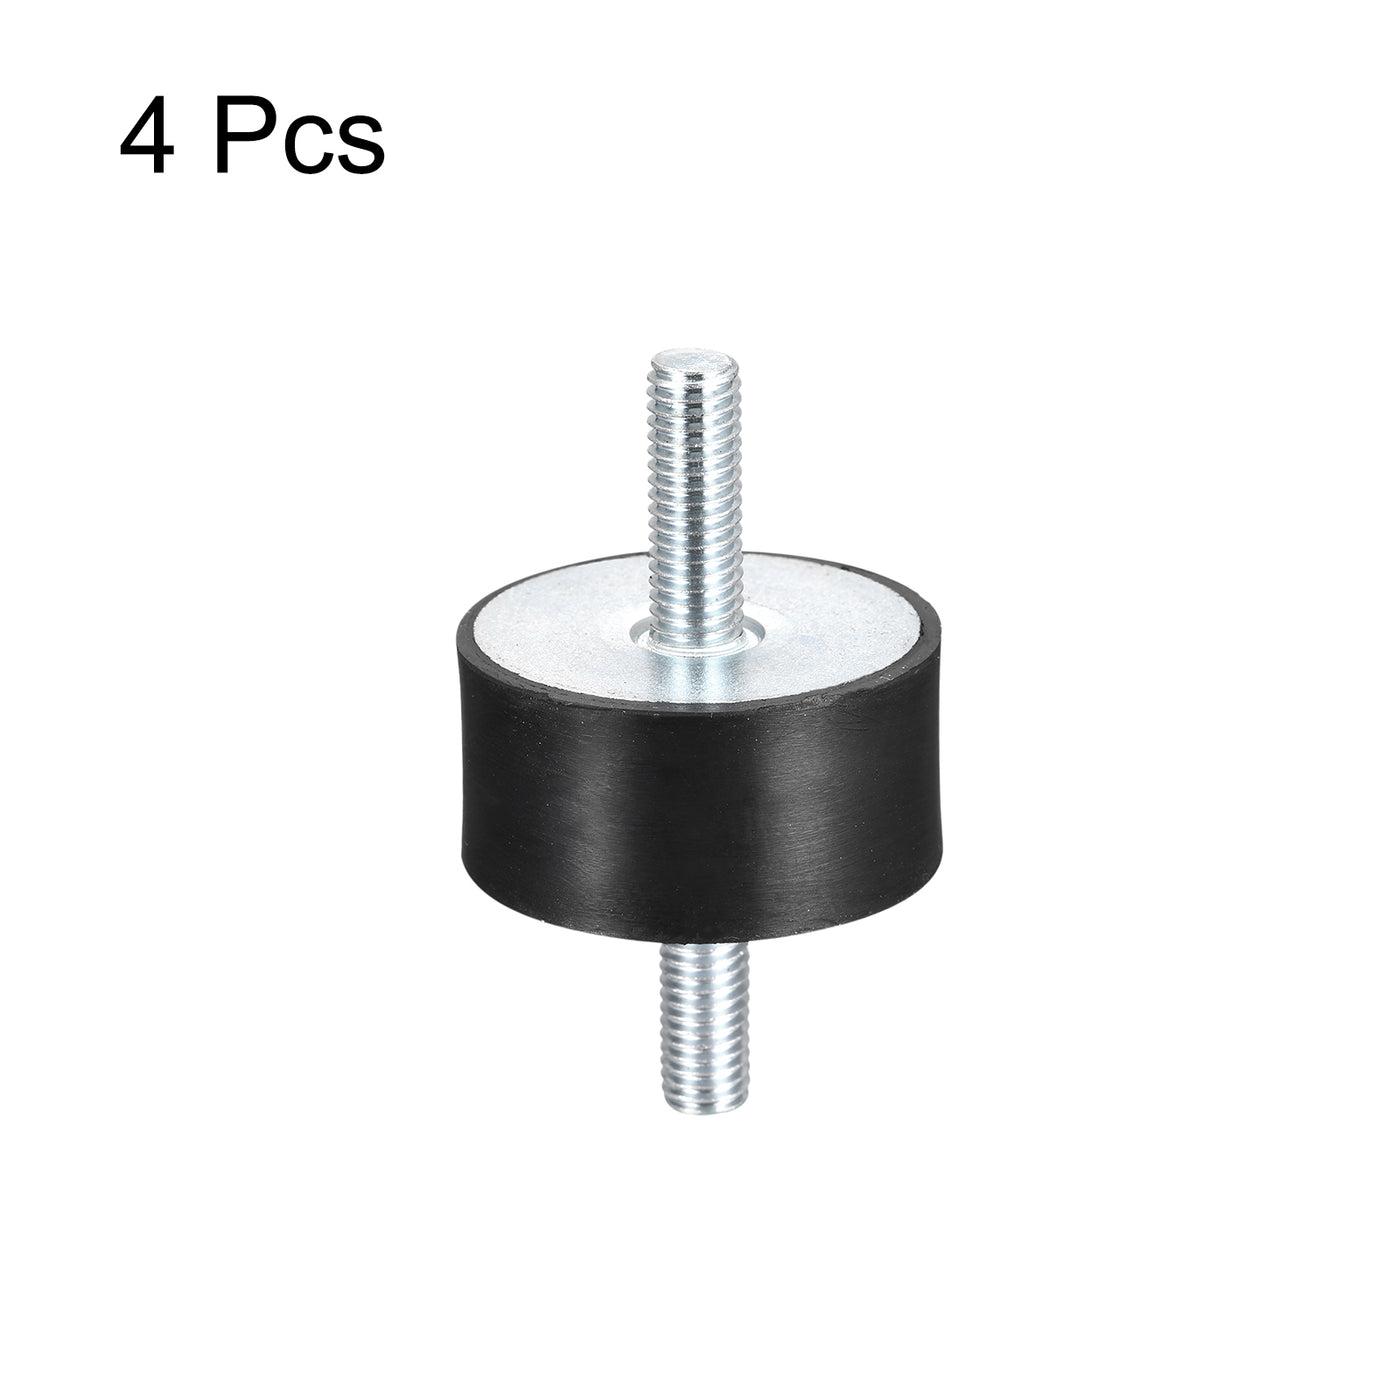 uxcell Uxcell Rubber Mounts 4pcs M8x23mm Male Vibration Isolator Shock Absorber D40mmxH20mm